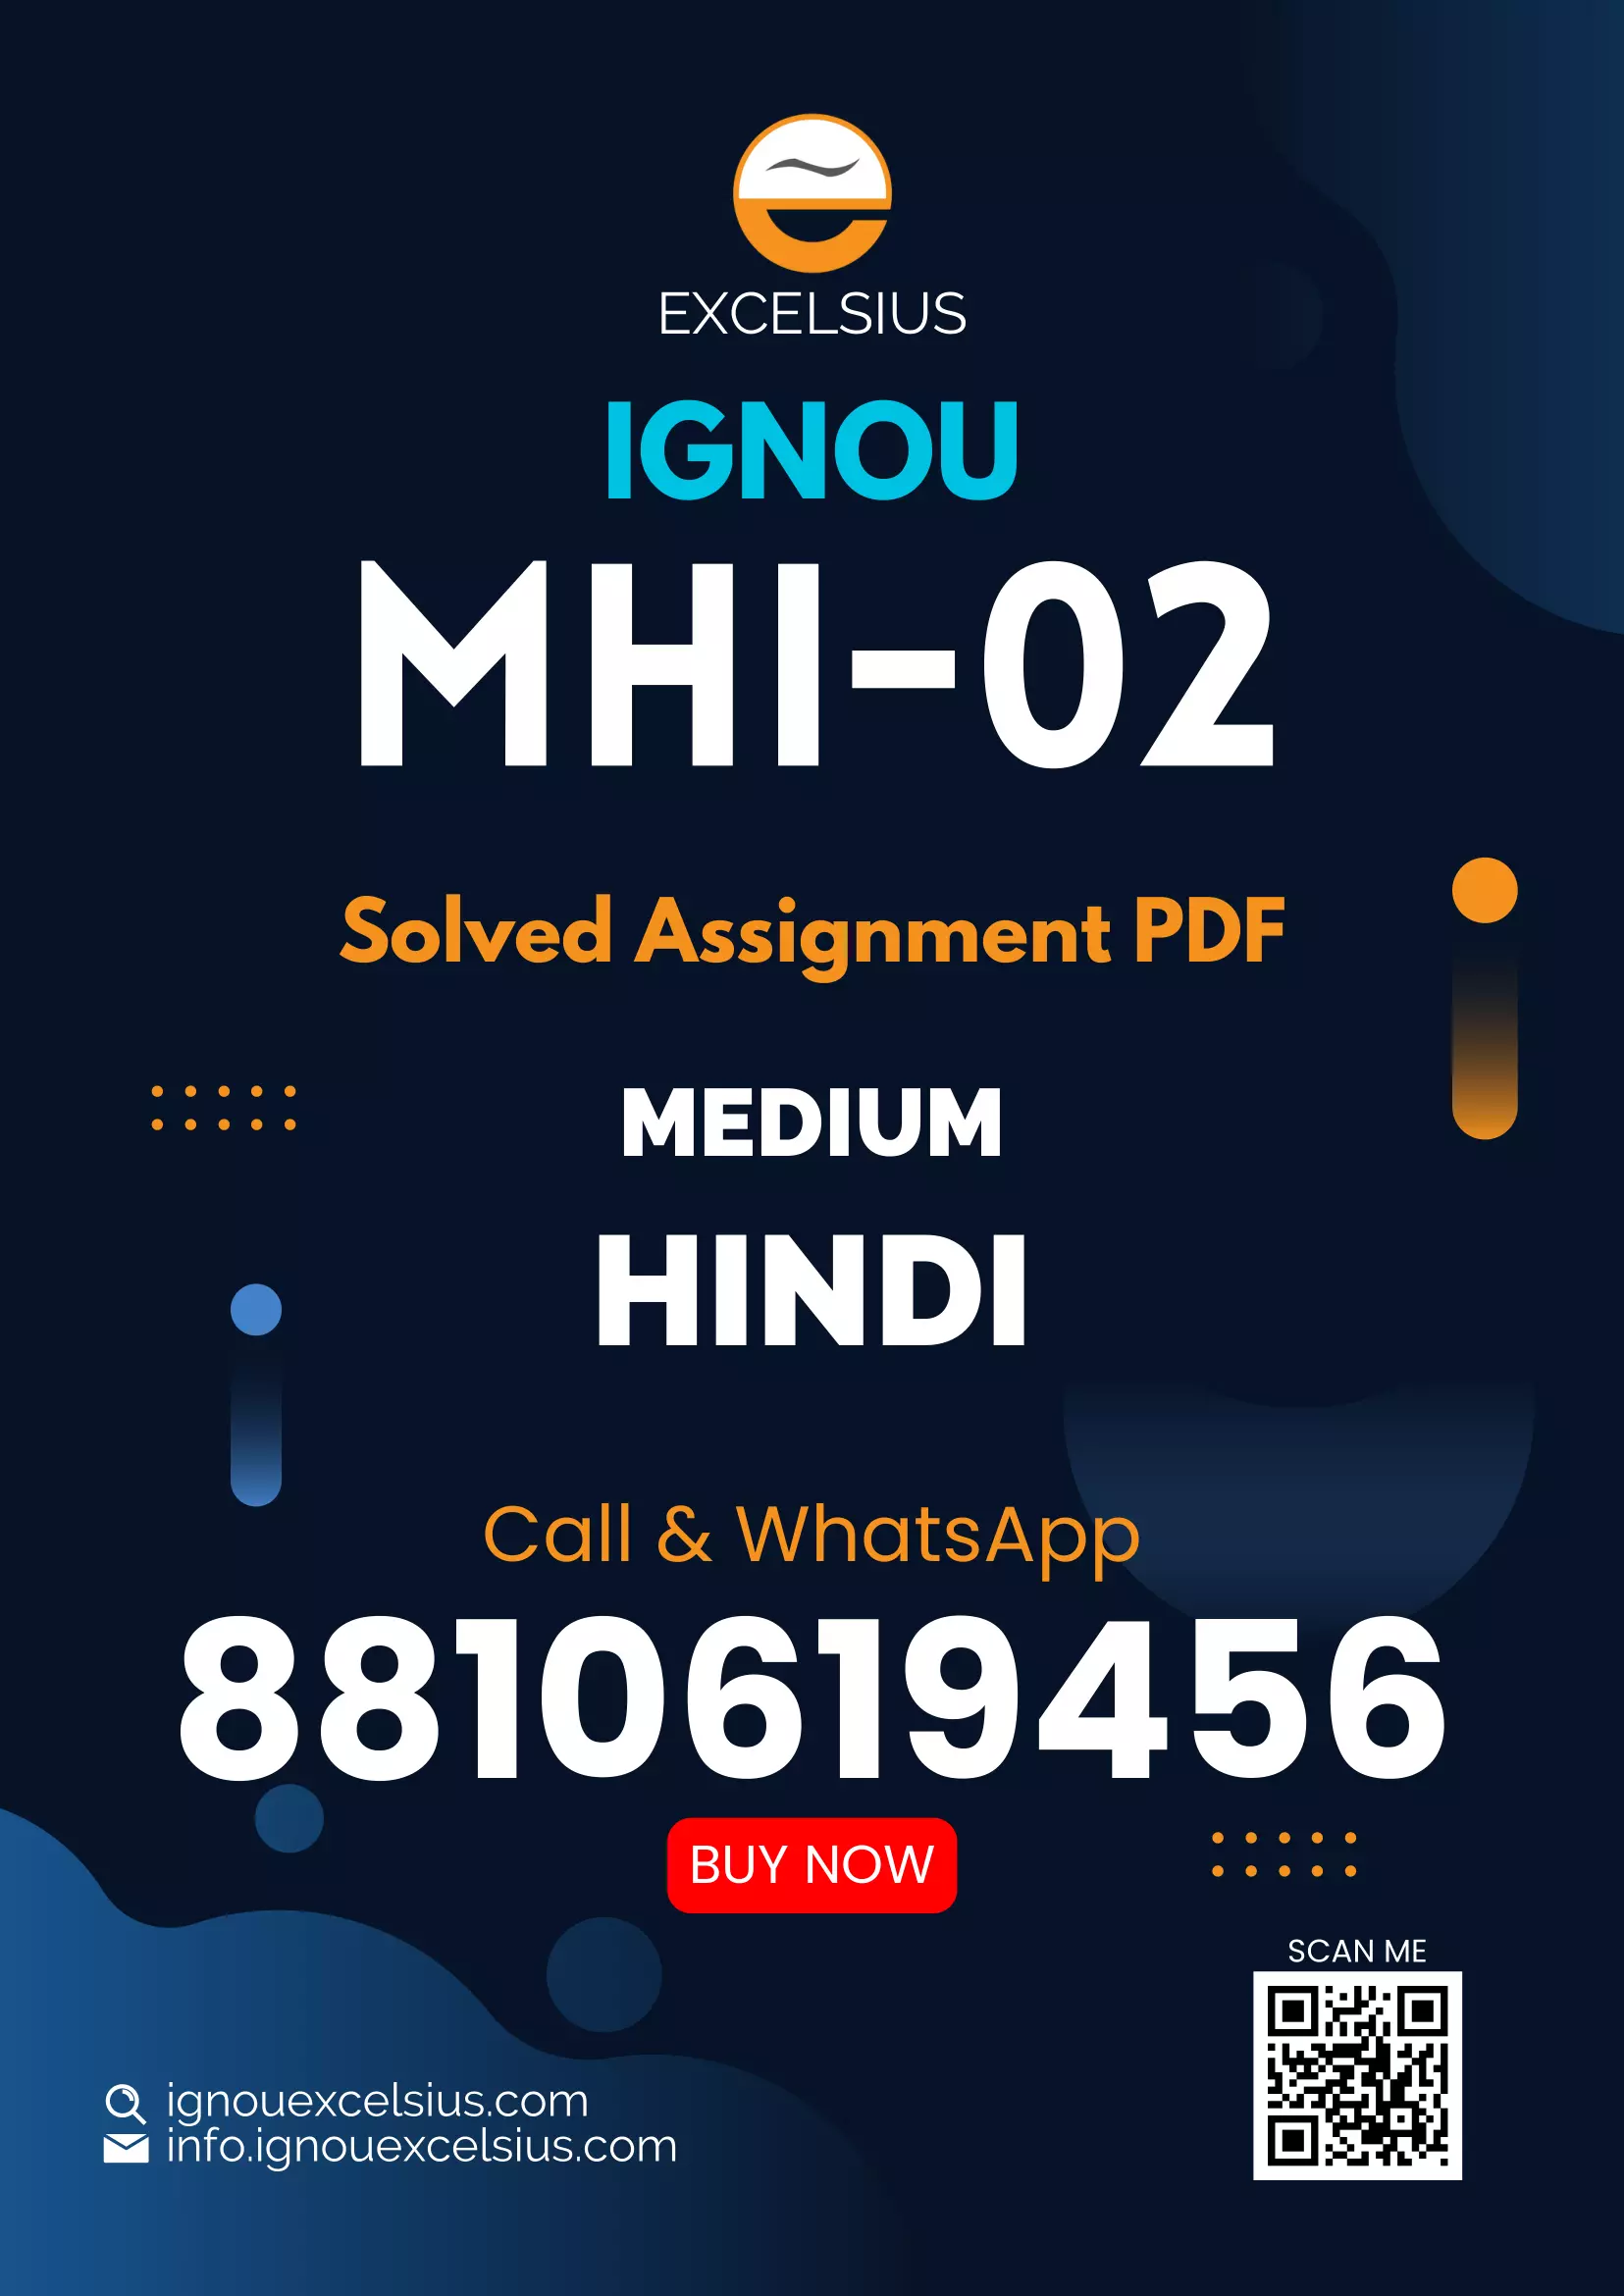 IGNOU MHI-02 - Modern World Latest Solved Assignment-July 2022 – January 2023